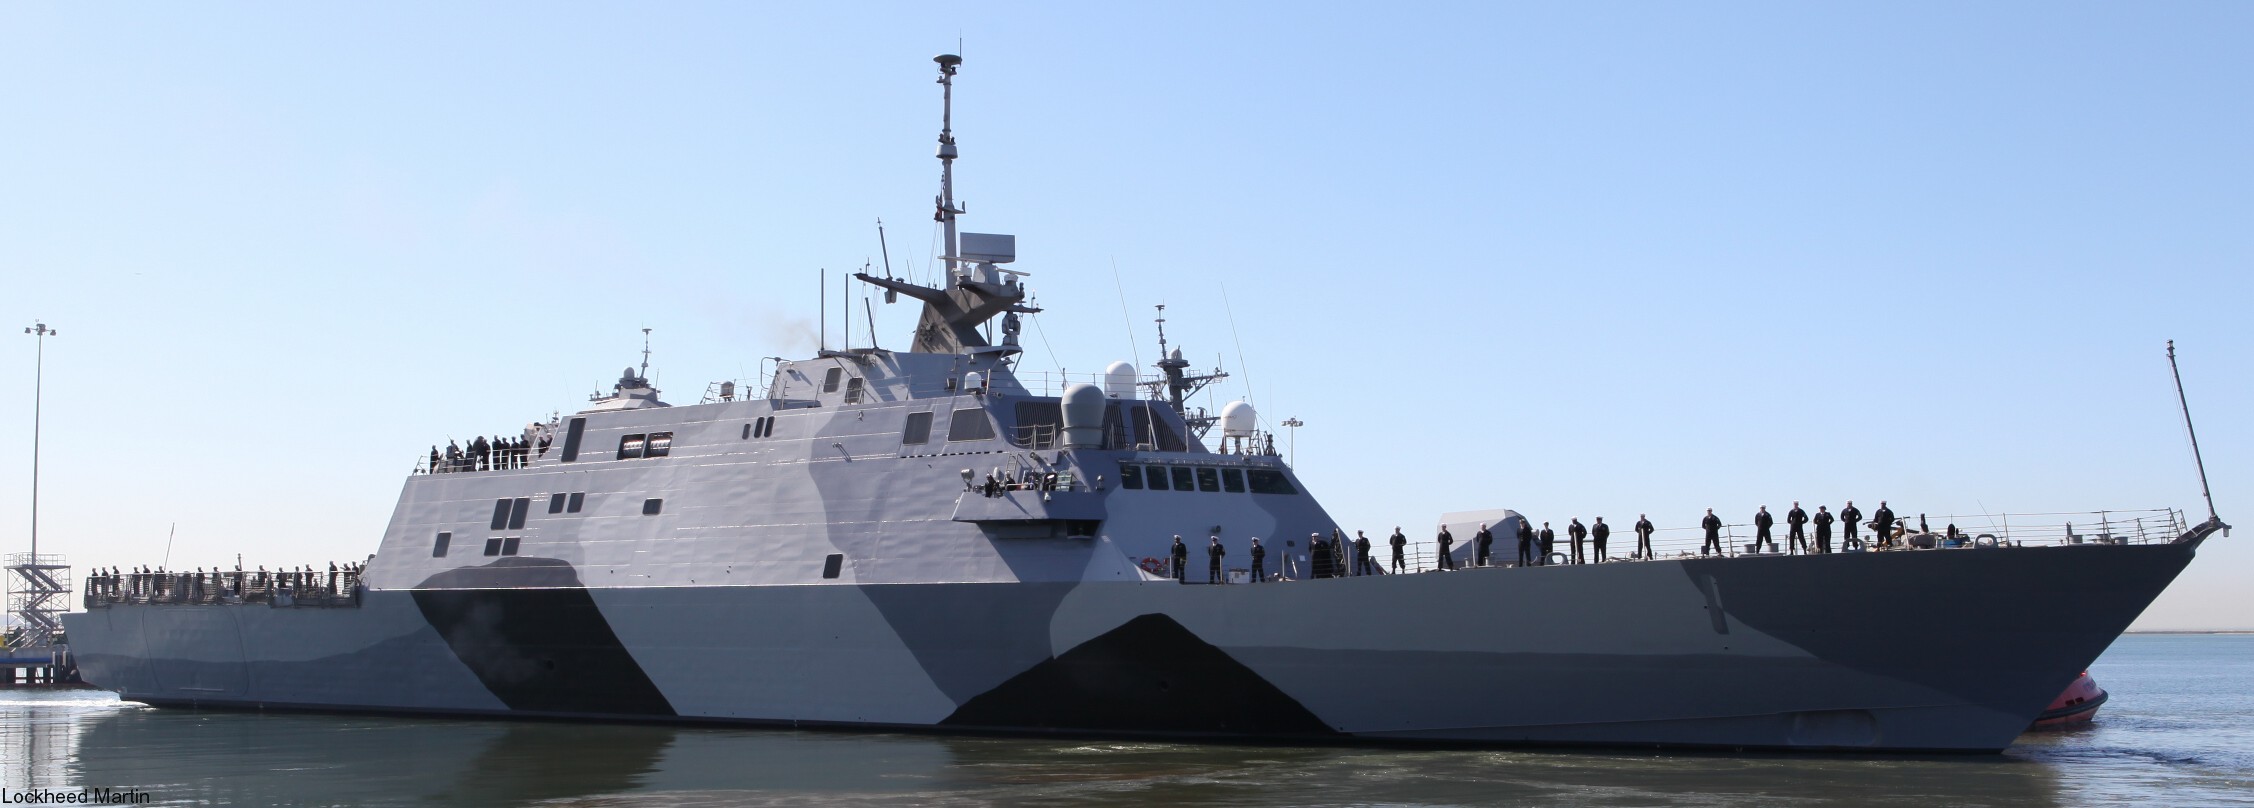 lcs-1 uss freedom class littoral combat ship us navy 191